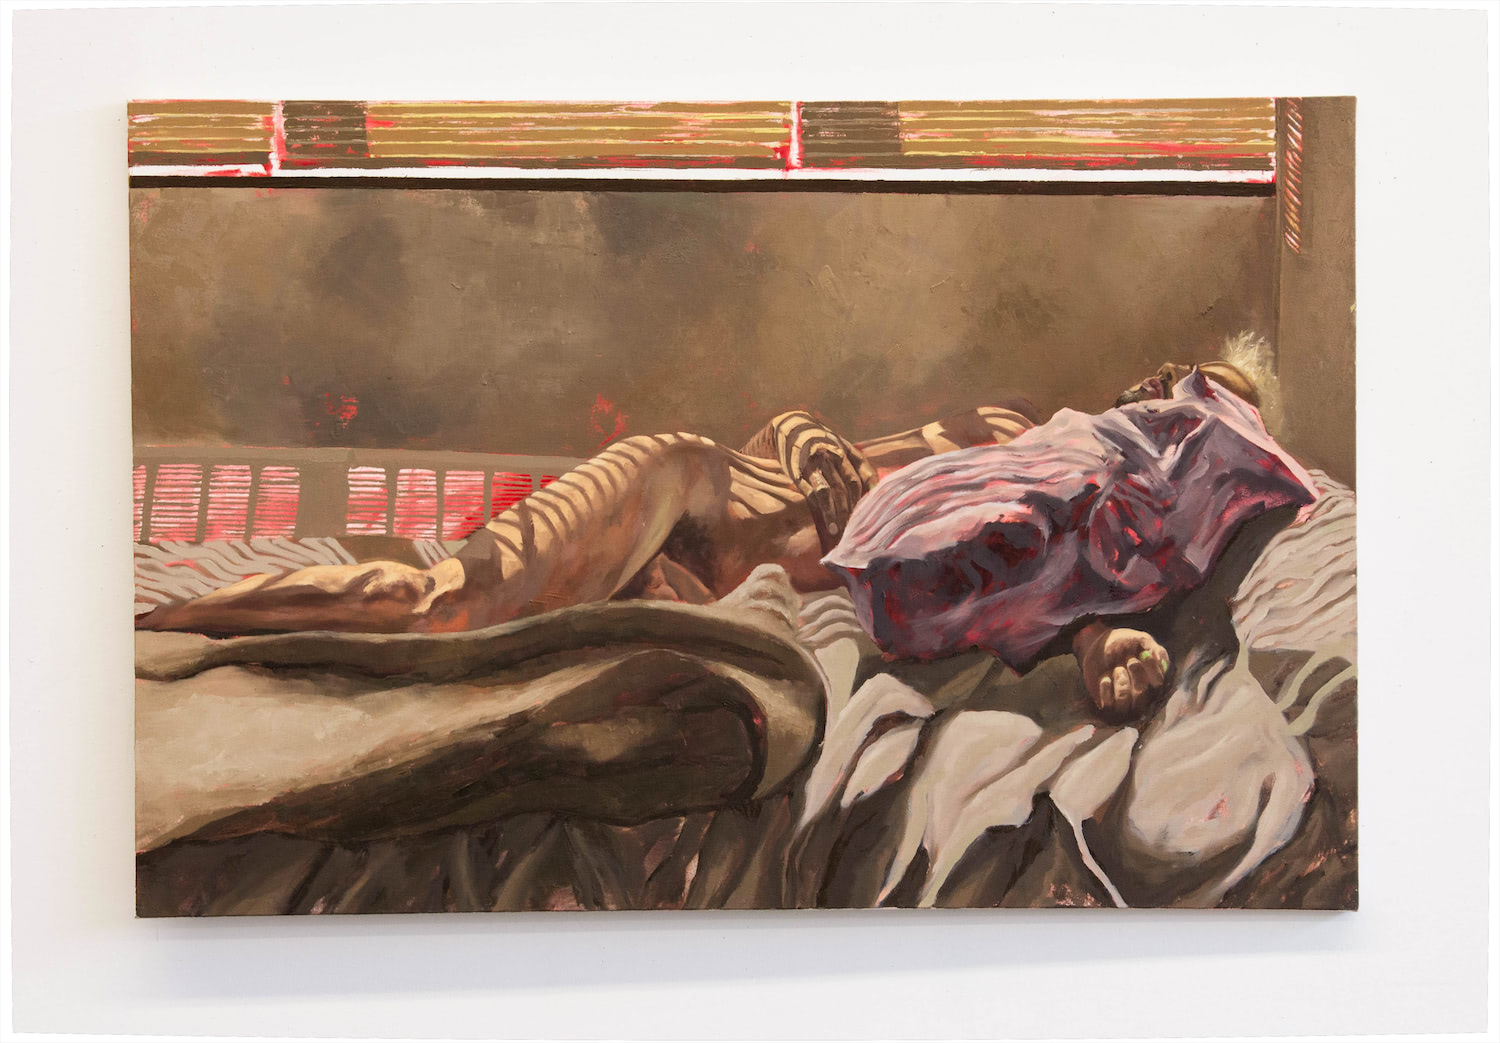 This image depicts a figurative oil painting of the artist himself.  In this horizontal painting, a man lies fully in the nude with his face covered by a pillow. The angle is straight on, raising questions of voyeurism, yet the pose is one of sensuality. Similar to the previous two images, deep reds from the underpainting are present throughout.